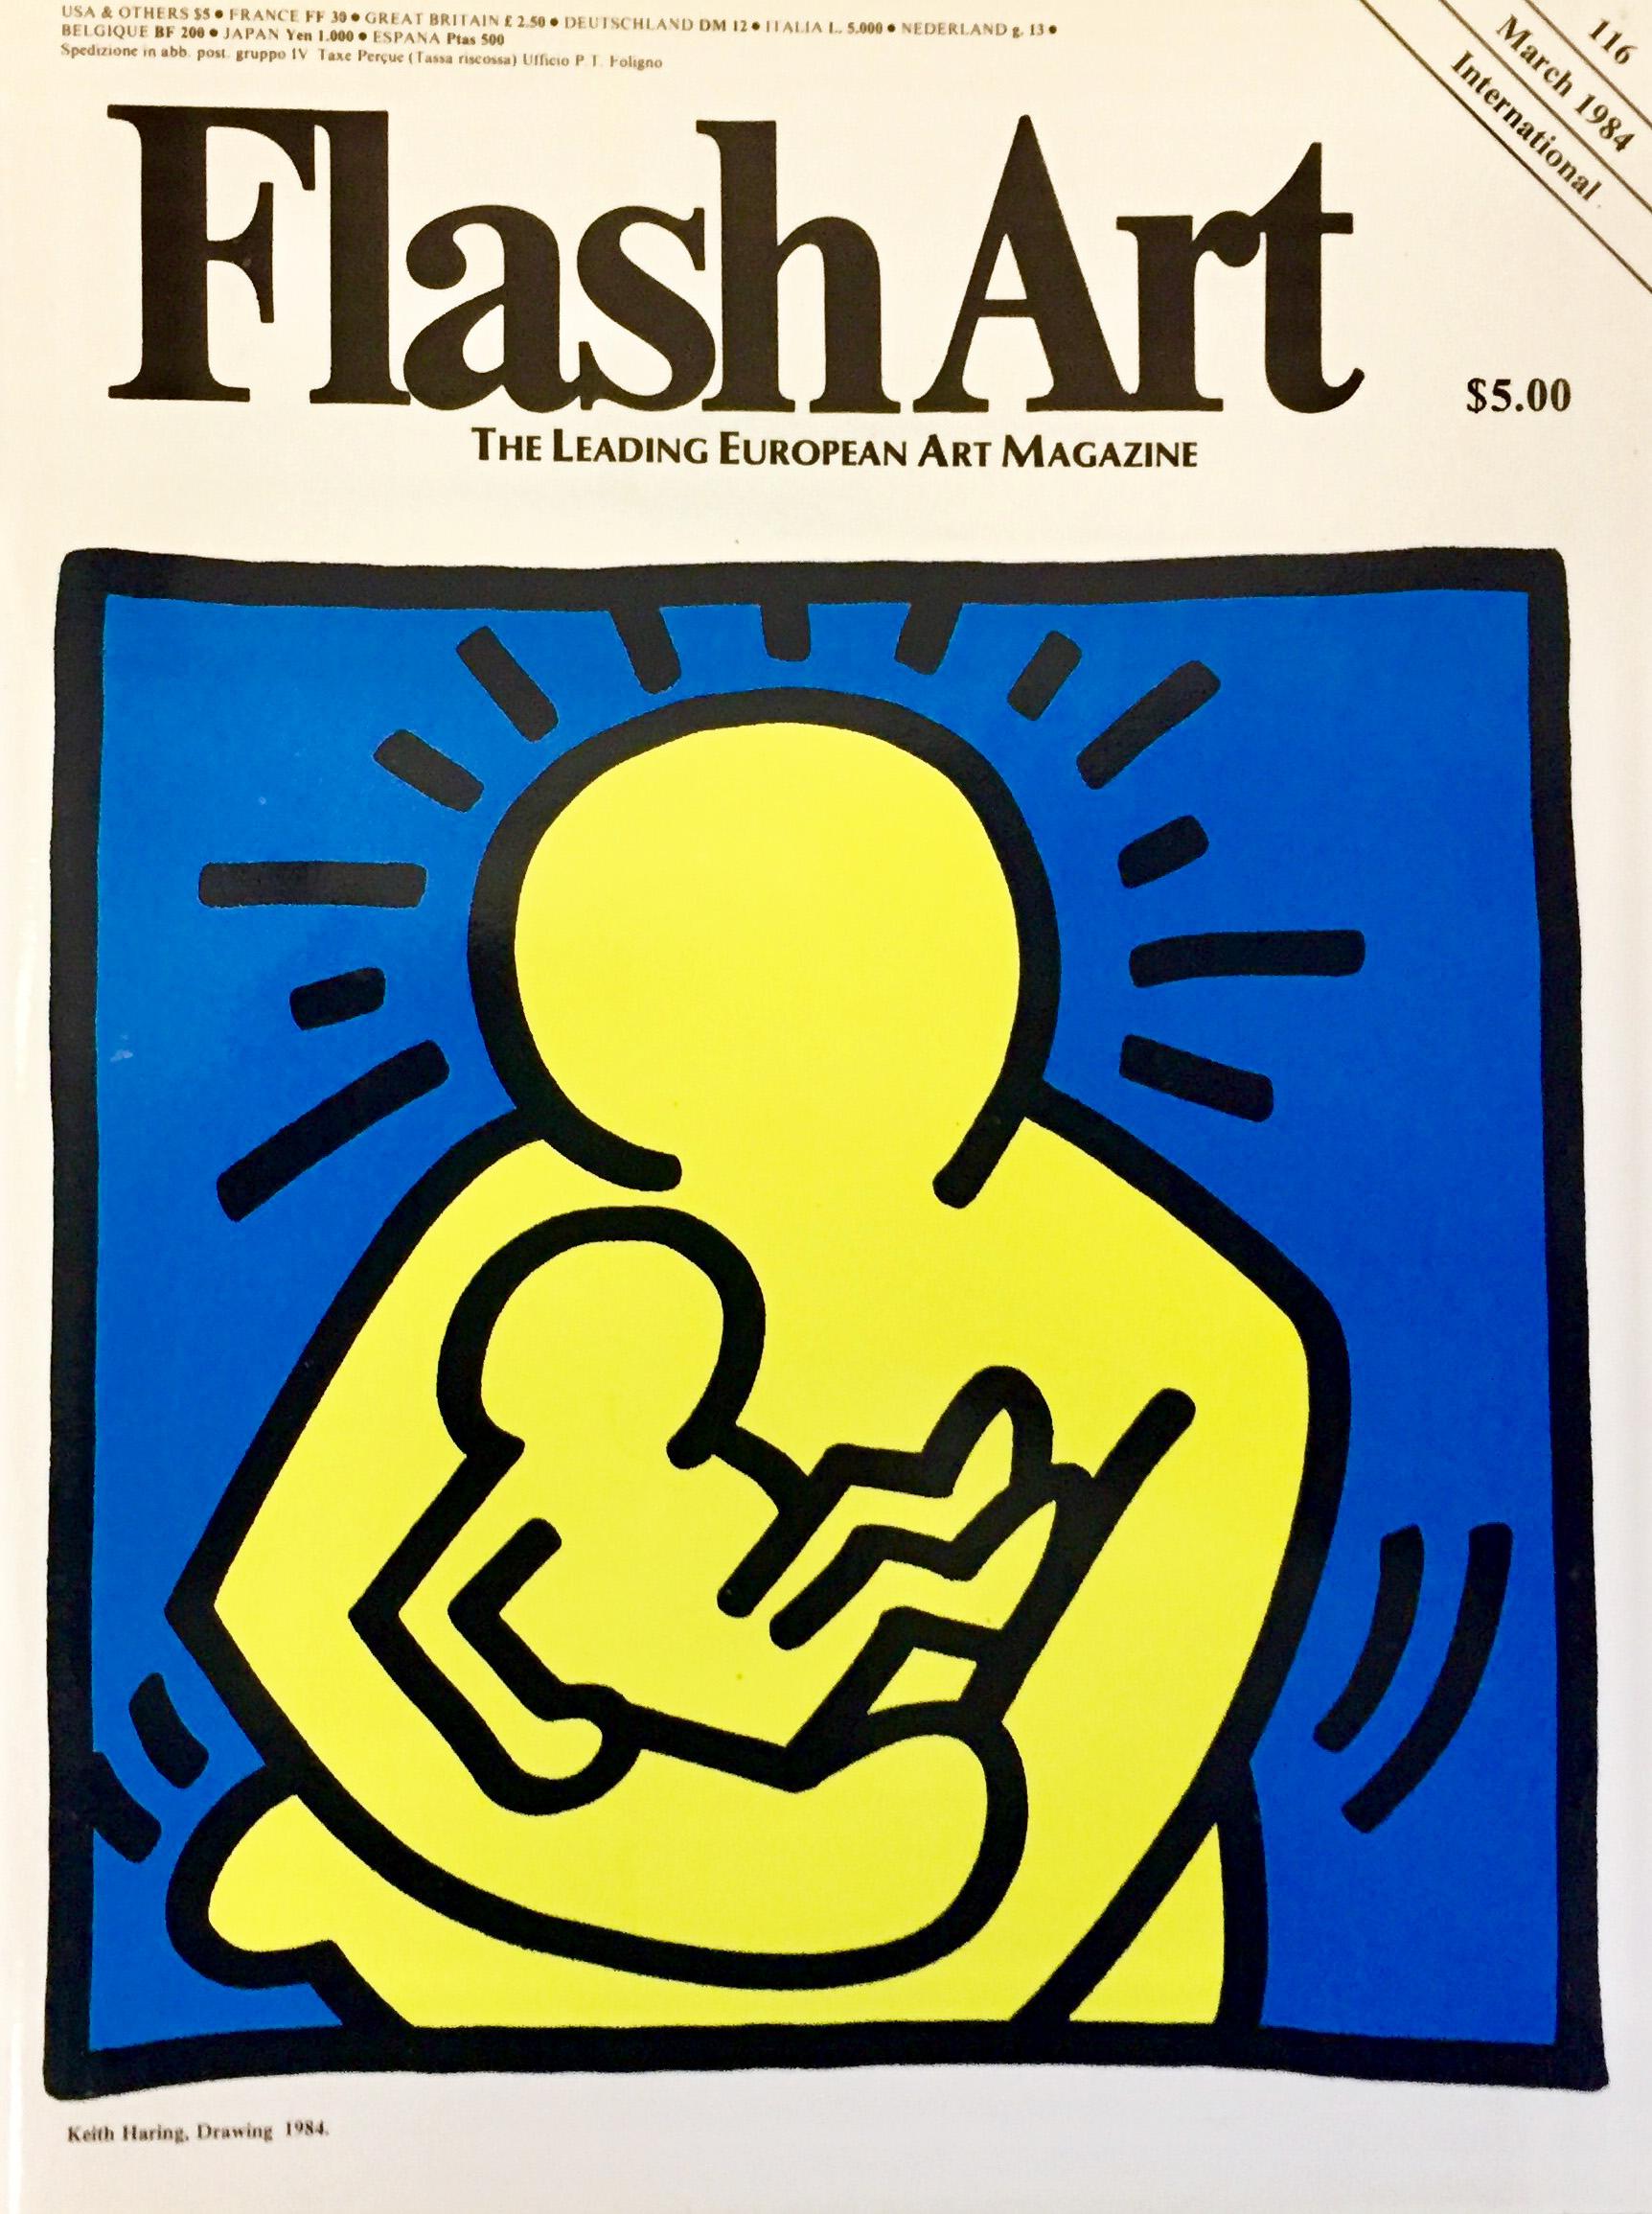 Keith Haring illustrated 'Flash Art' 1984
Rare 1980s Flash Art magazine featuring standout cover art by Keith Haring. A classic, vintage Haring collectible that would look fantastic framed. Rare. 

Offset-printed; 9 x 12 inches
Feature story on